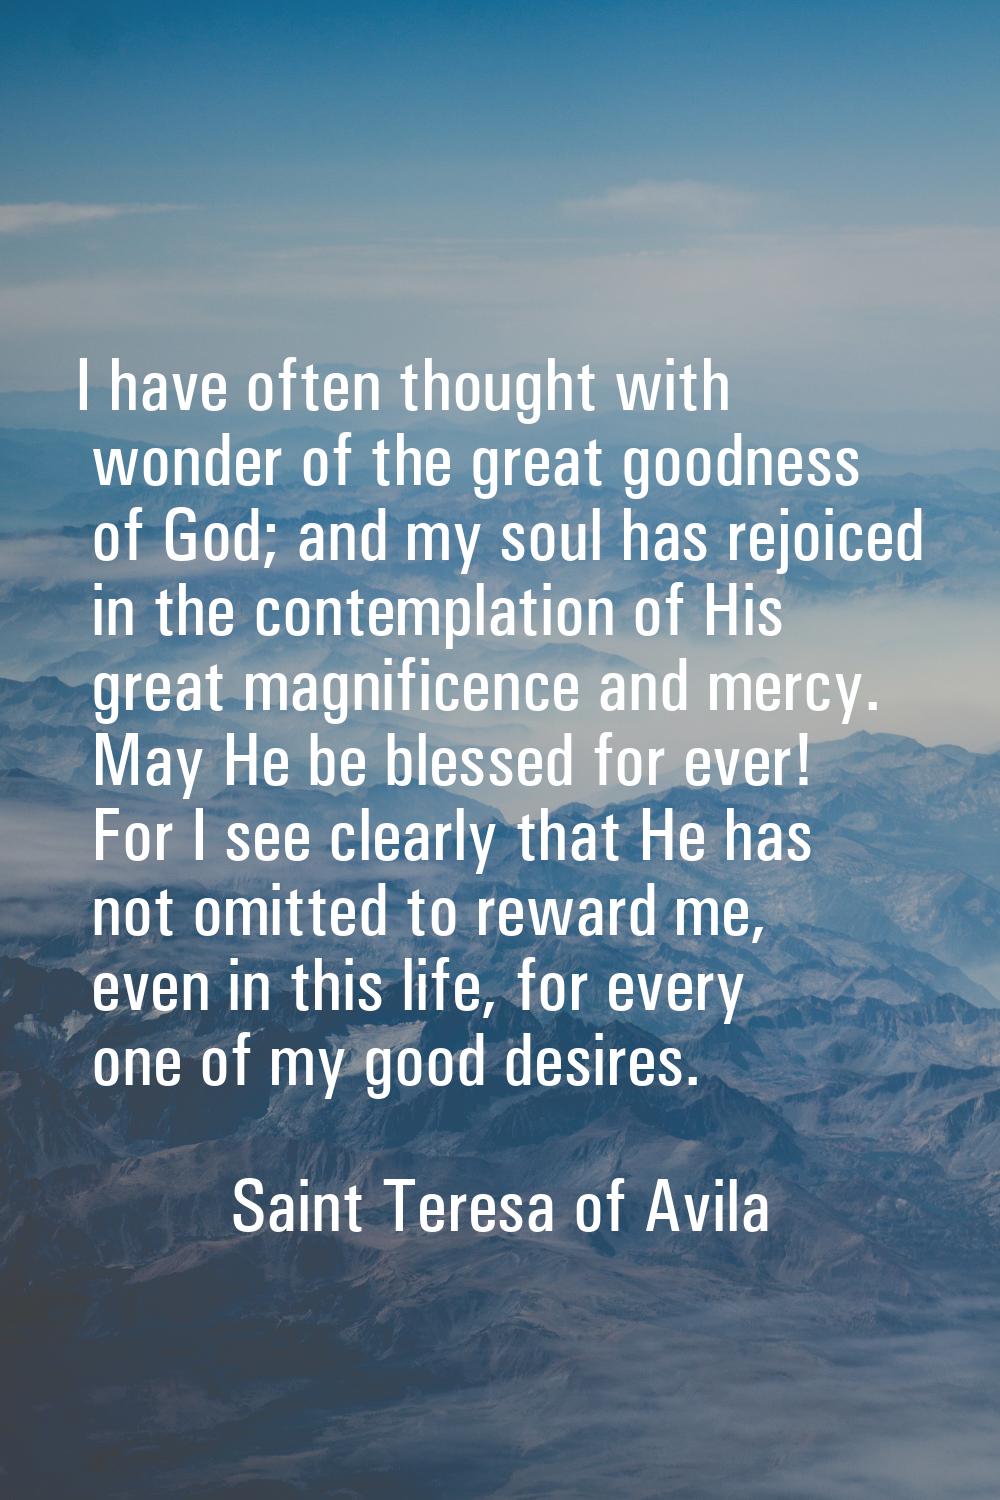 I have often thought with wonder of the great goodness of God; and my soul has rejoiced in the cont